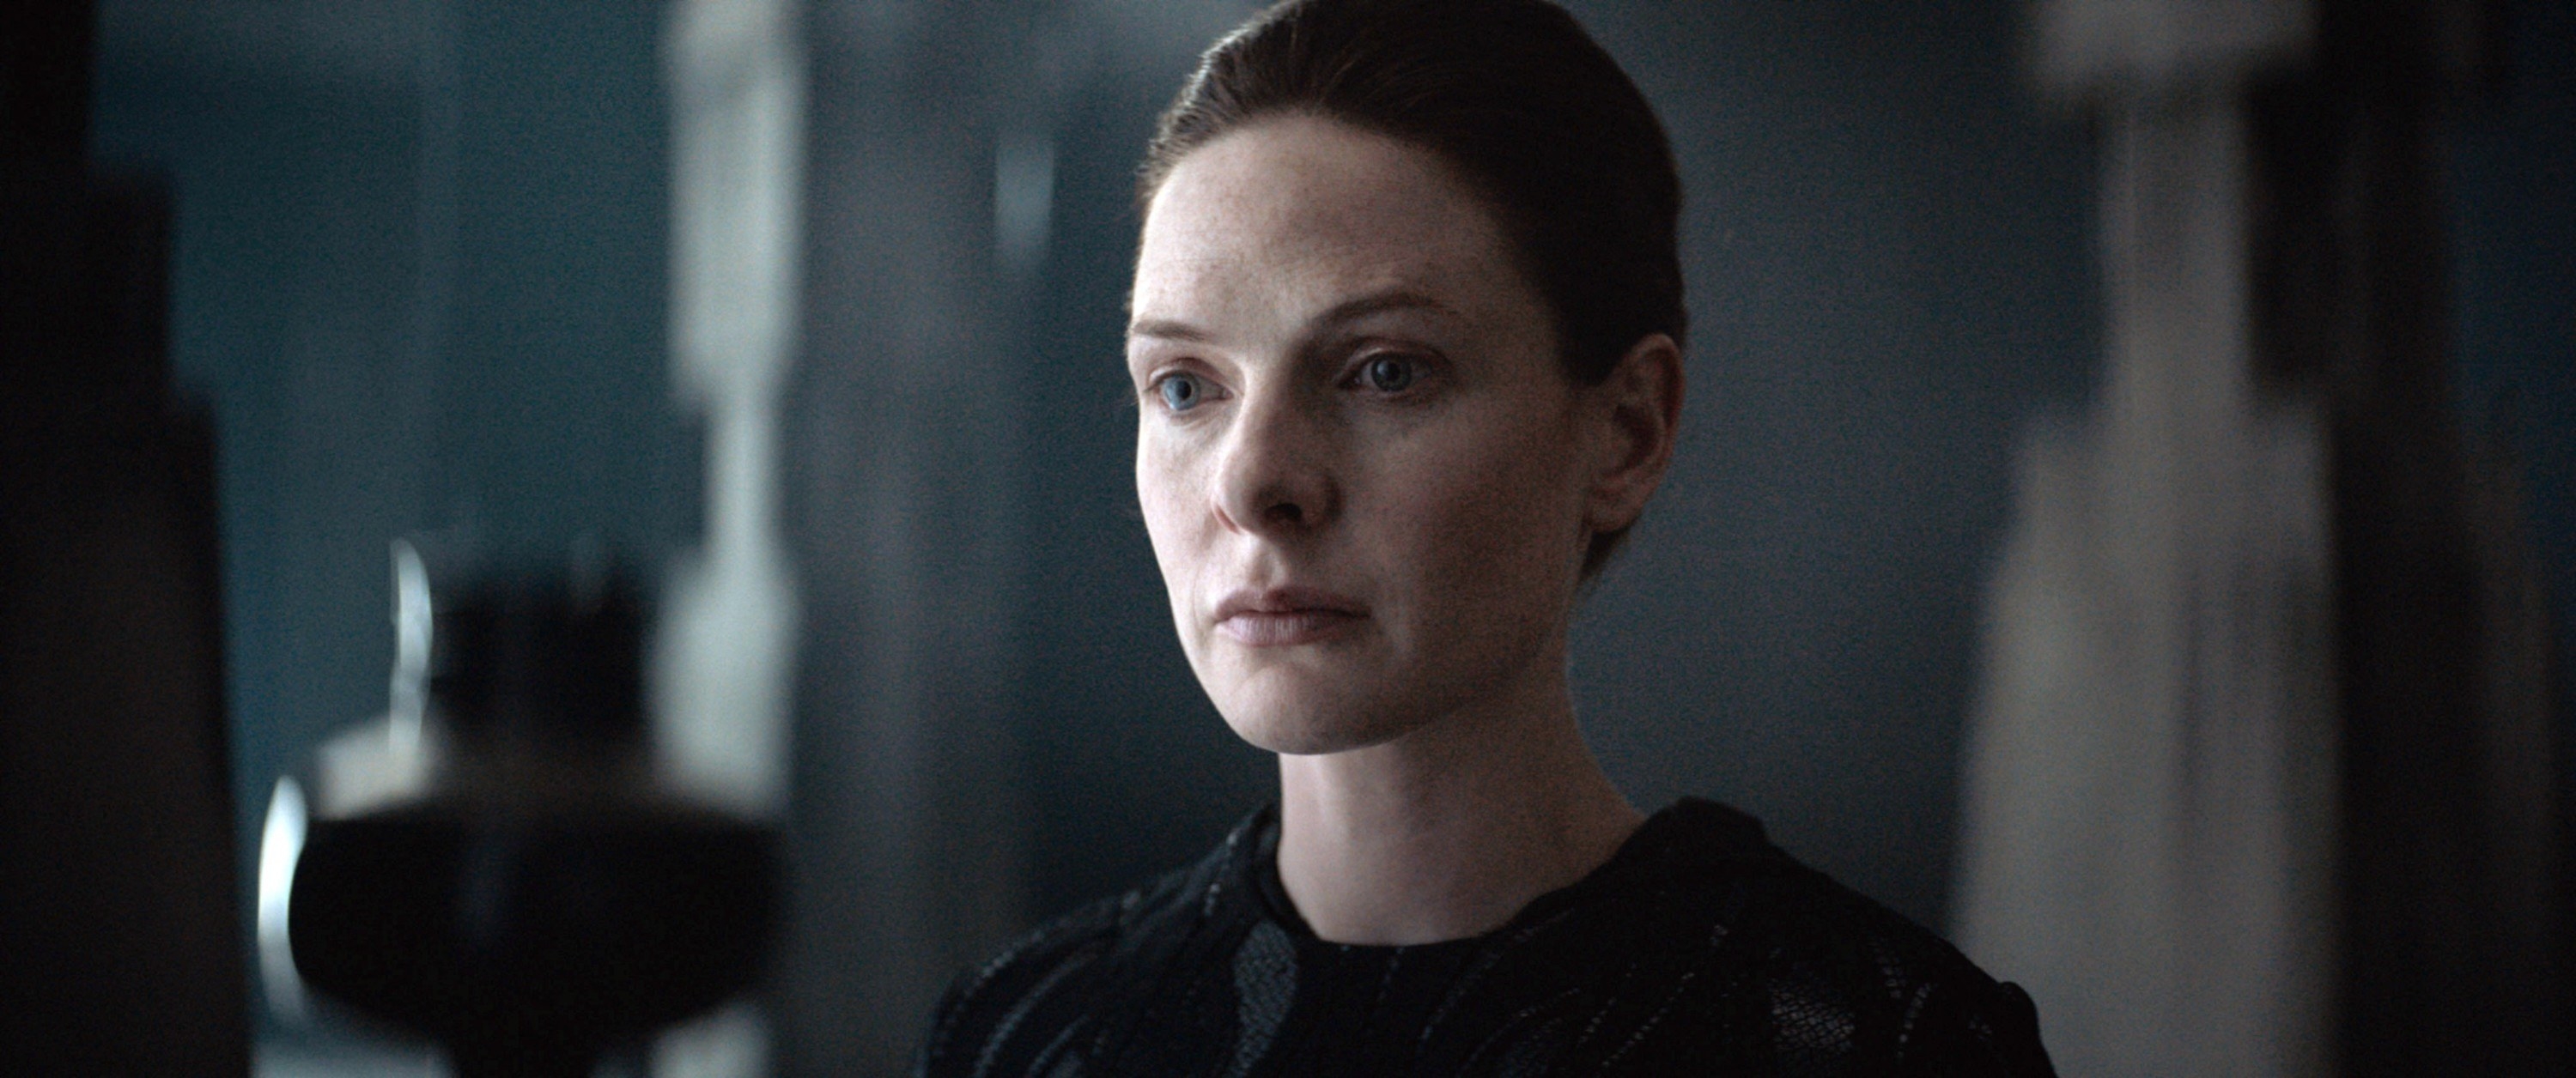 Jessica (Rebecca Ferguson) looking scared, standing in an old fortress